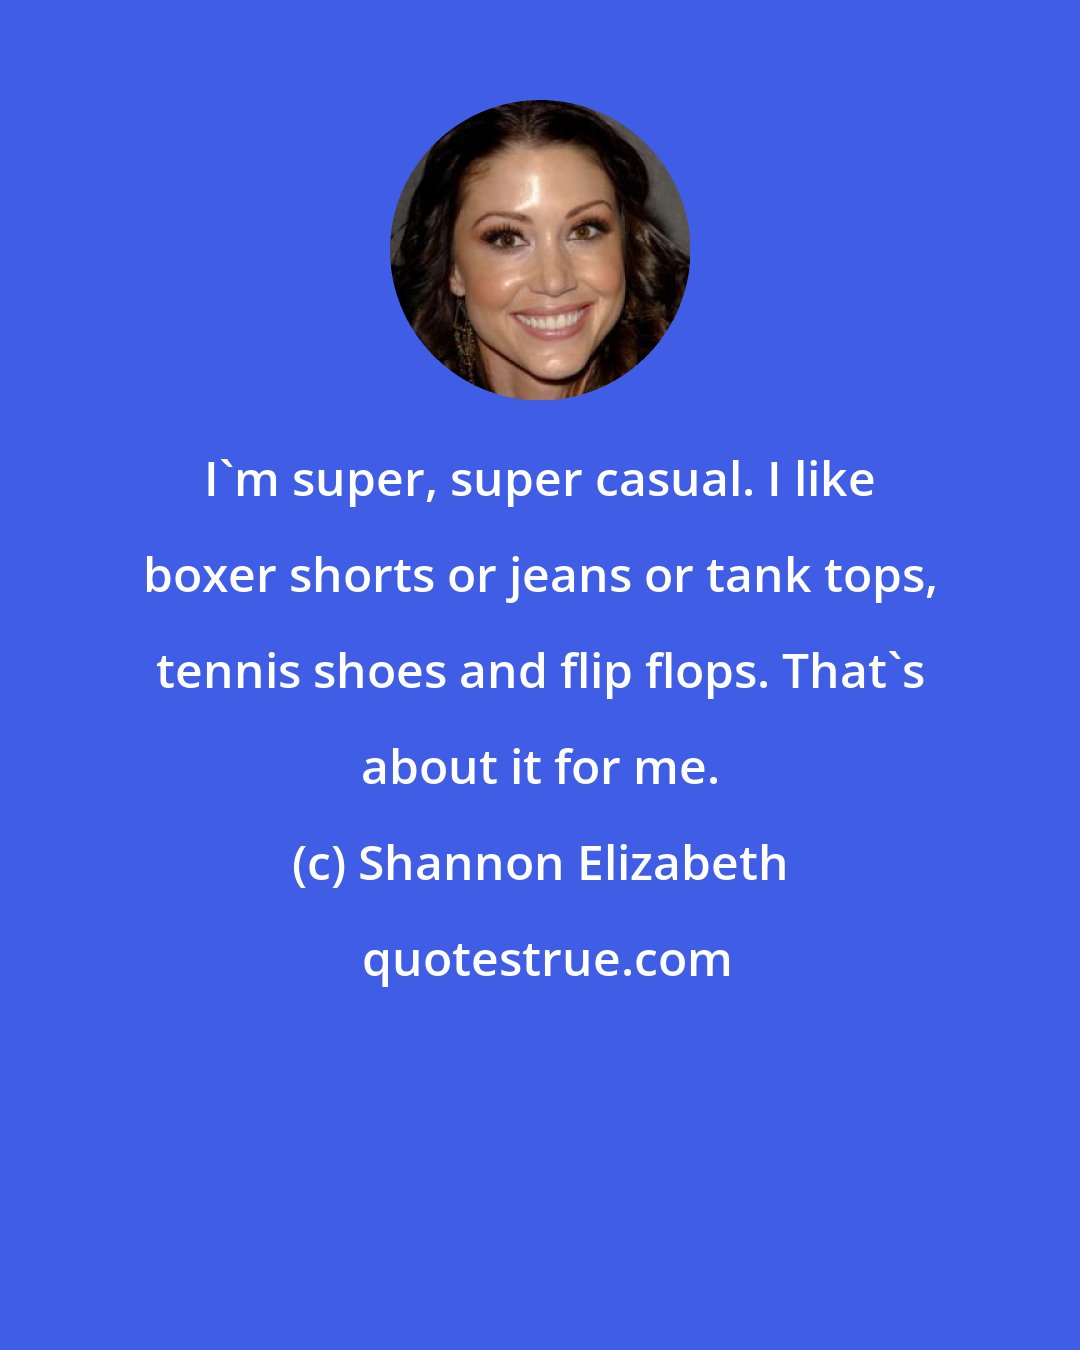 Shannon Elizabeth: I'm super, super casual. I like boxer shorts or jeans or tank tops, tennis shoes and flip flops. That's about it for me.